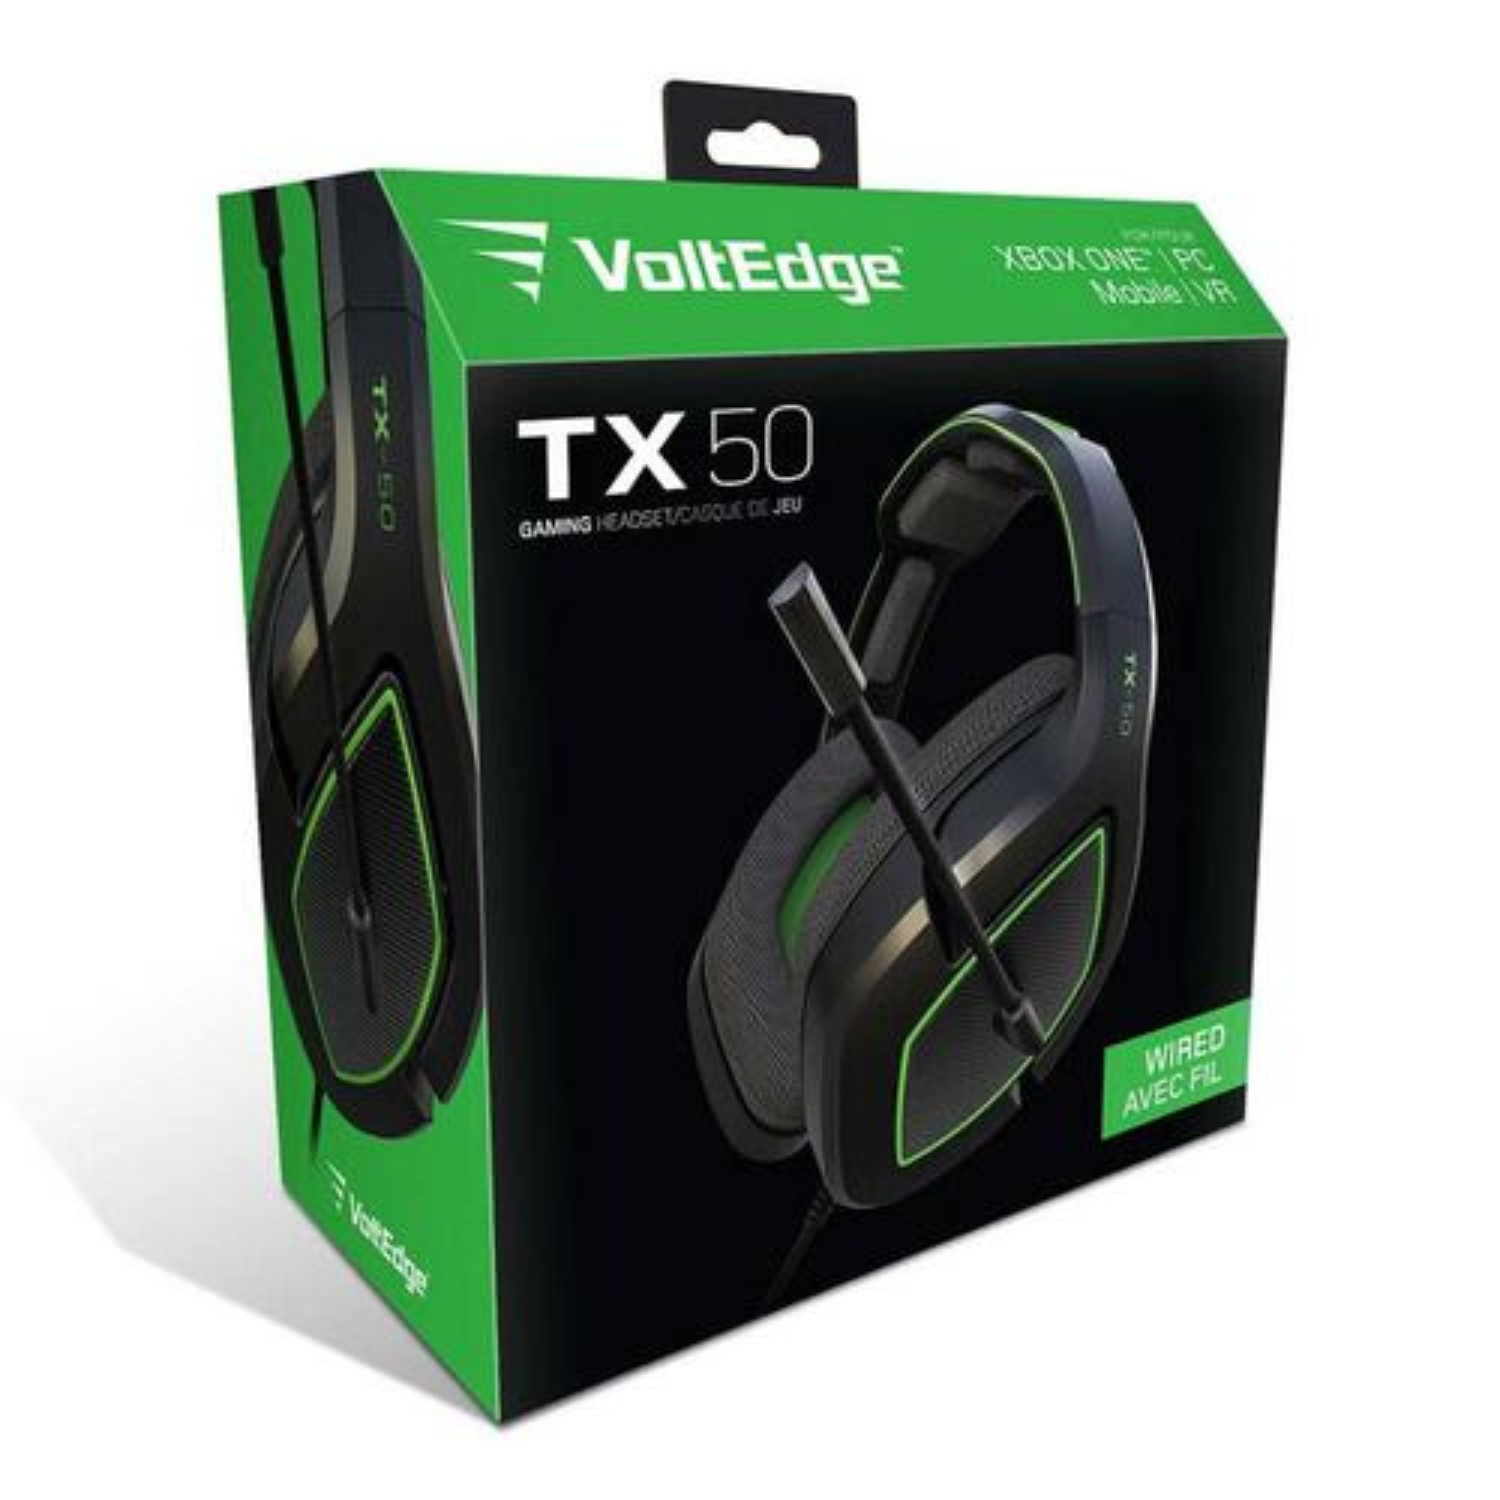 Tx50 Wired Headset xbox